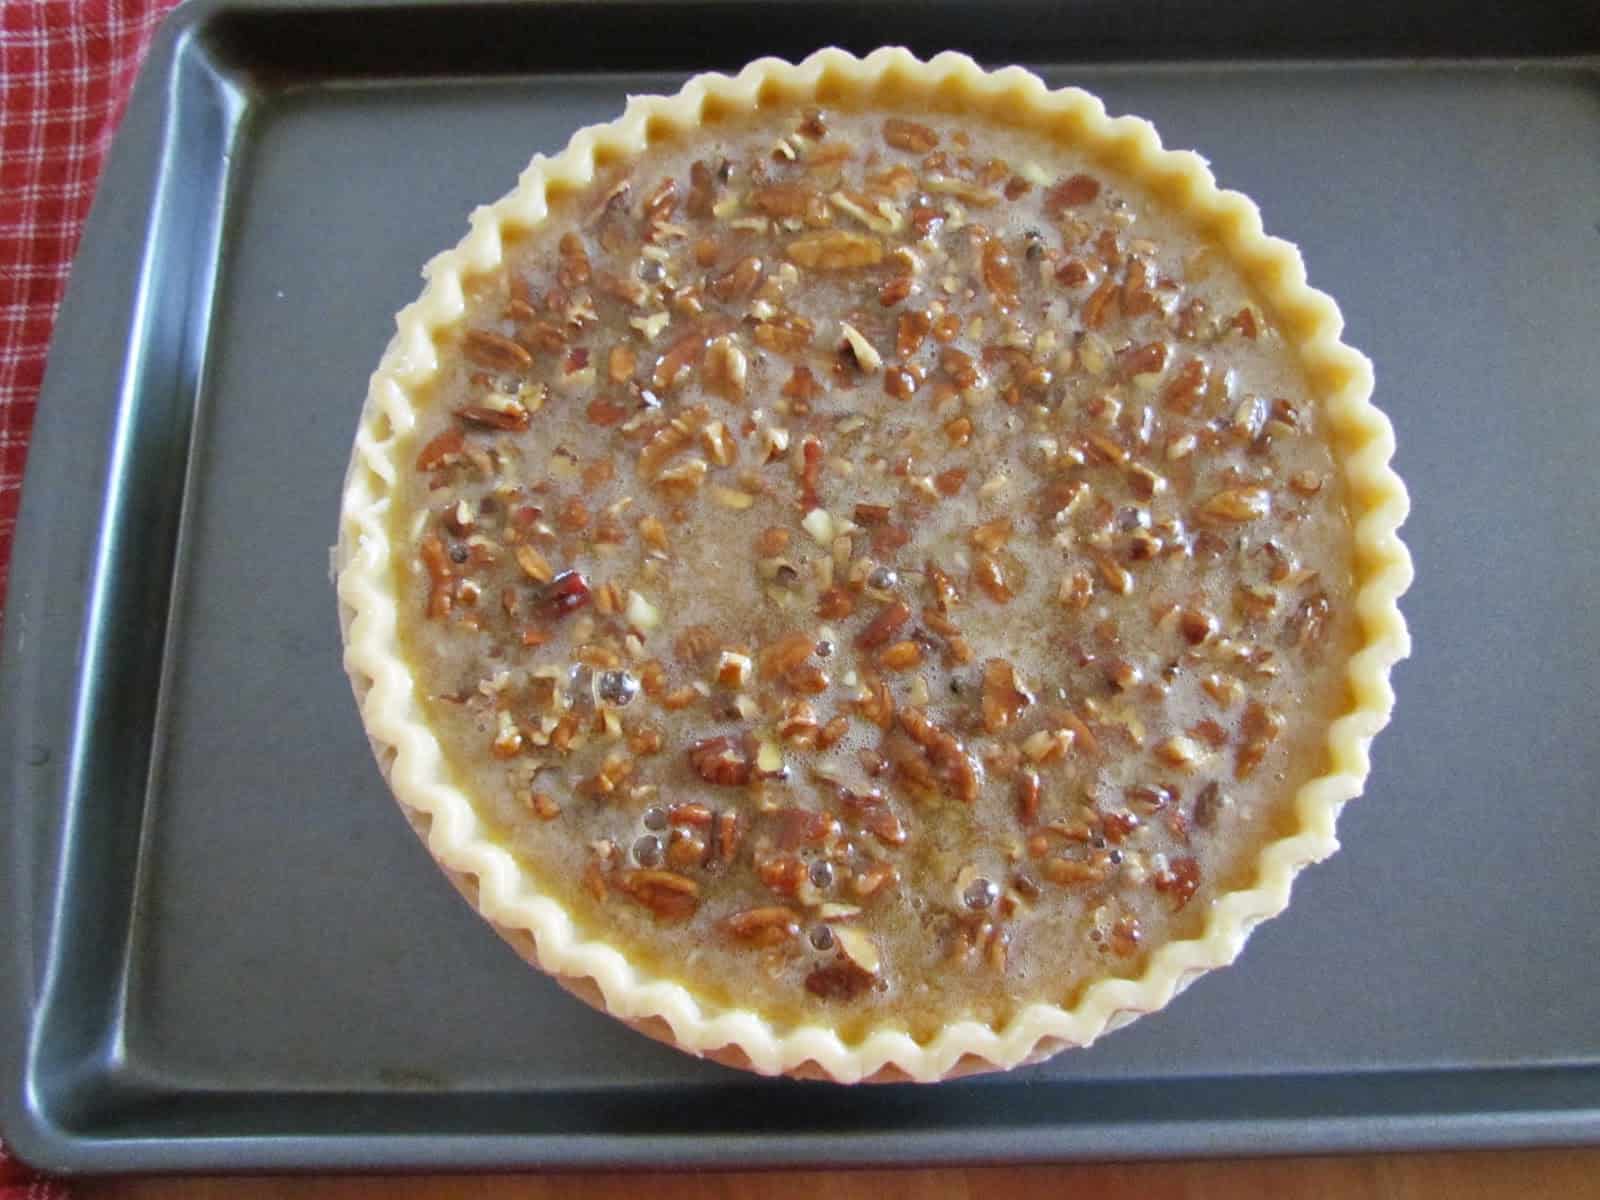 uncooked pecan pie on a baking sheet